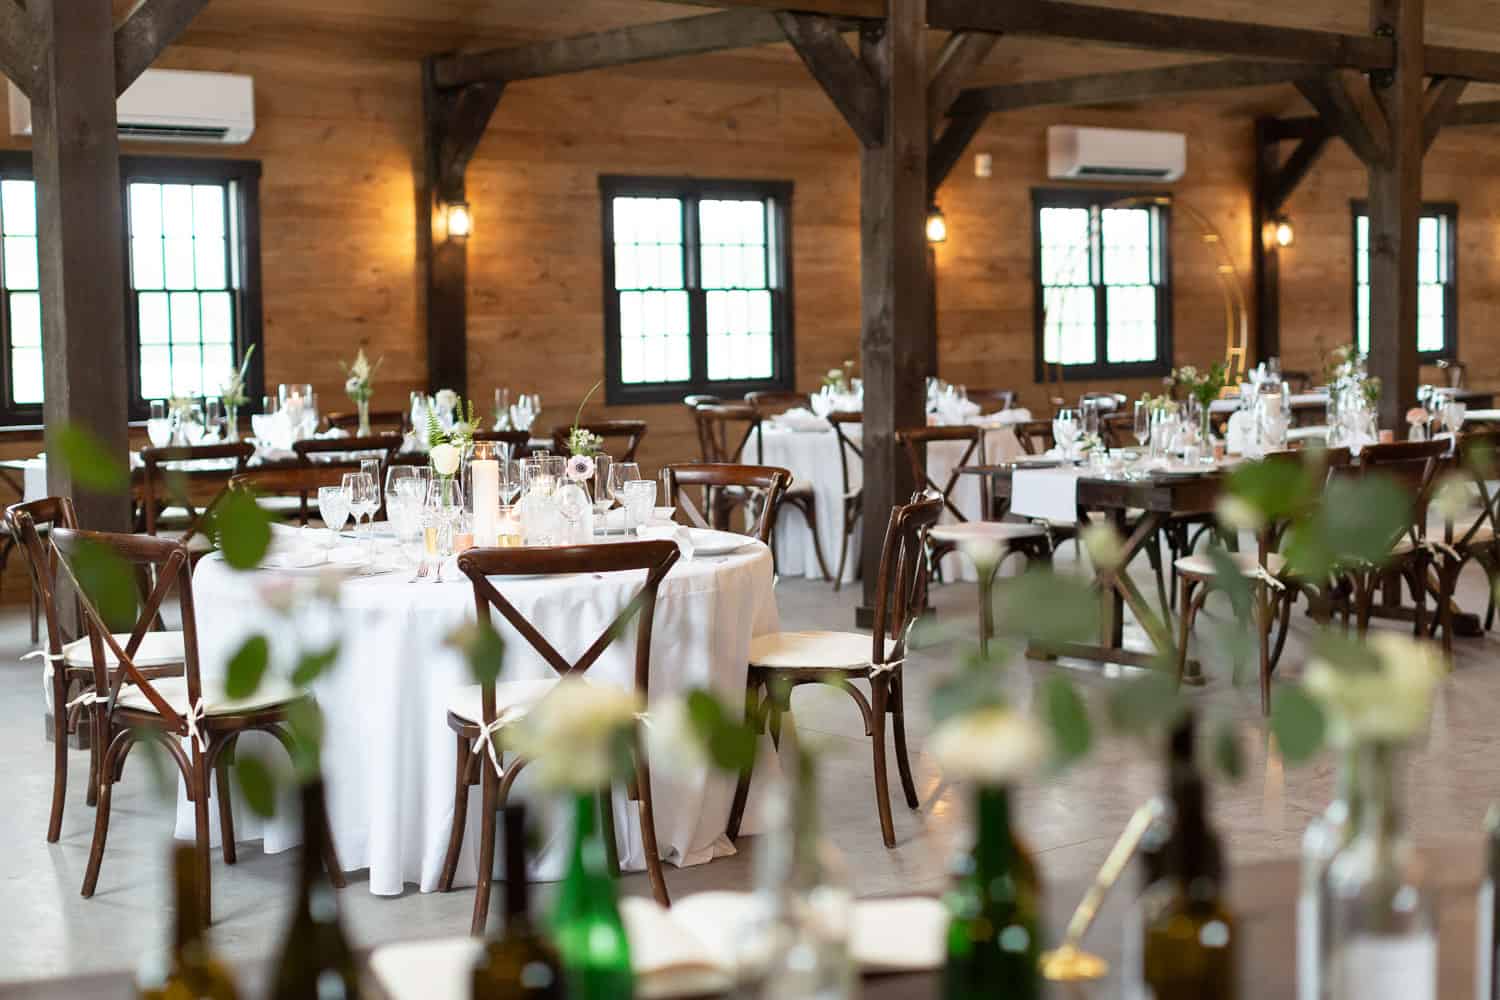 Ash Point Estate's elegant banquet hall: round tables, white linens, candles, wine bottles, exposed wooden beams, and large windows.